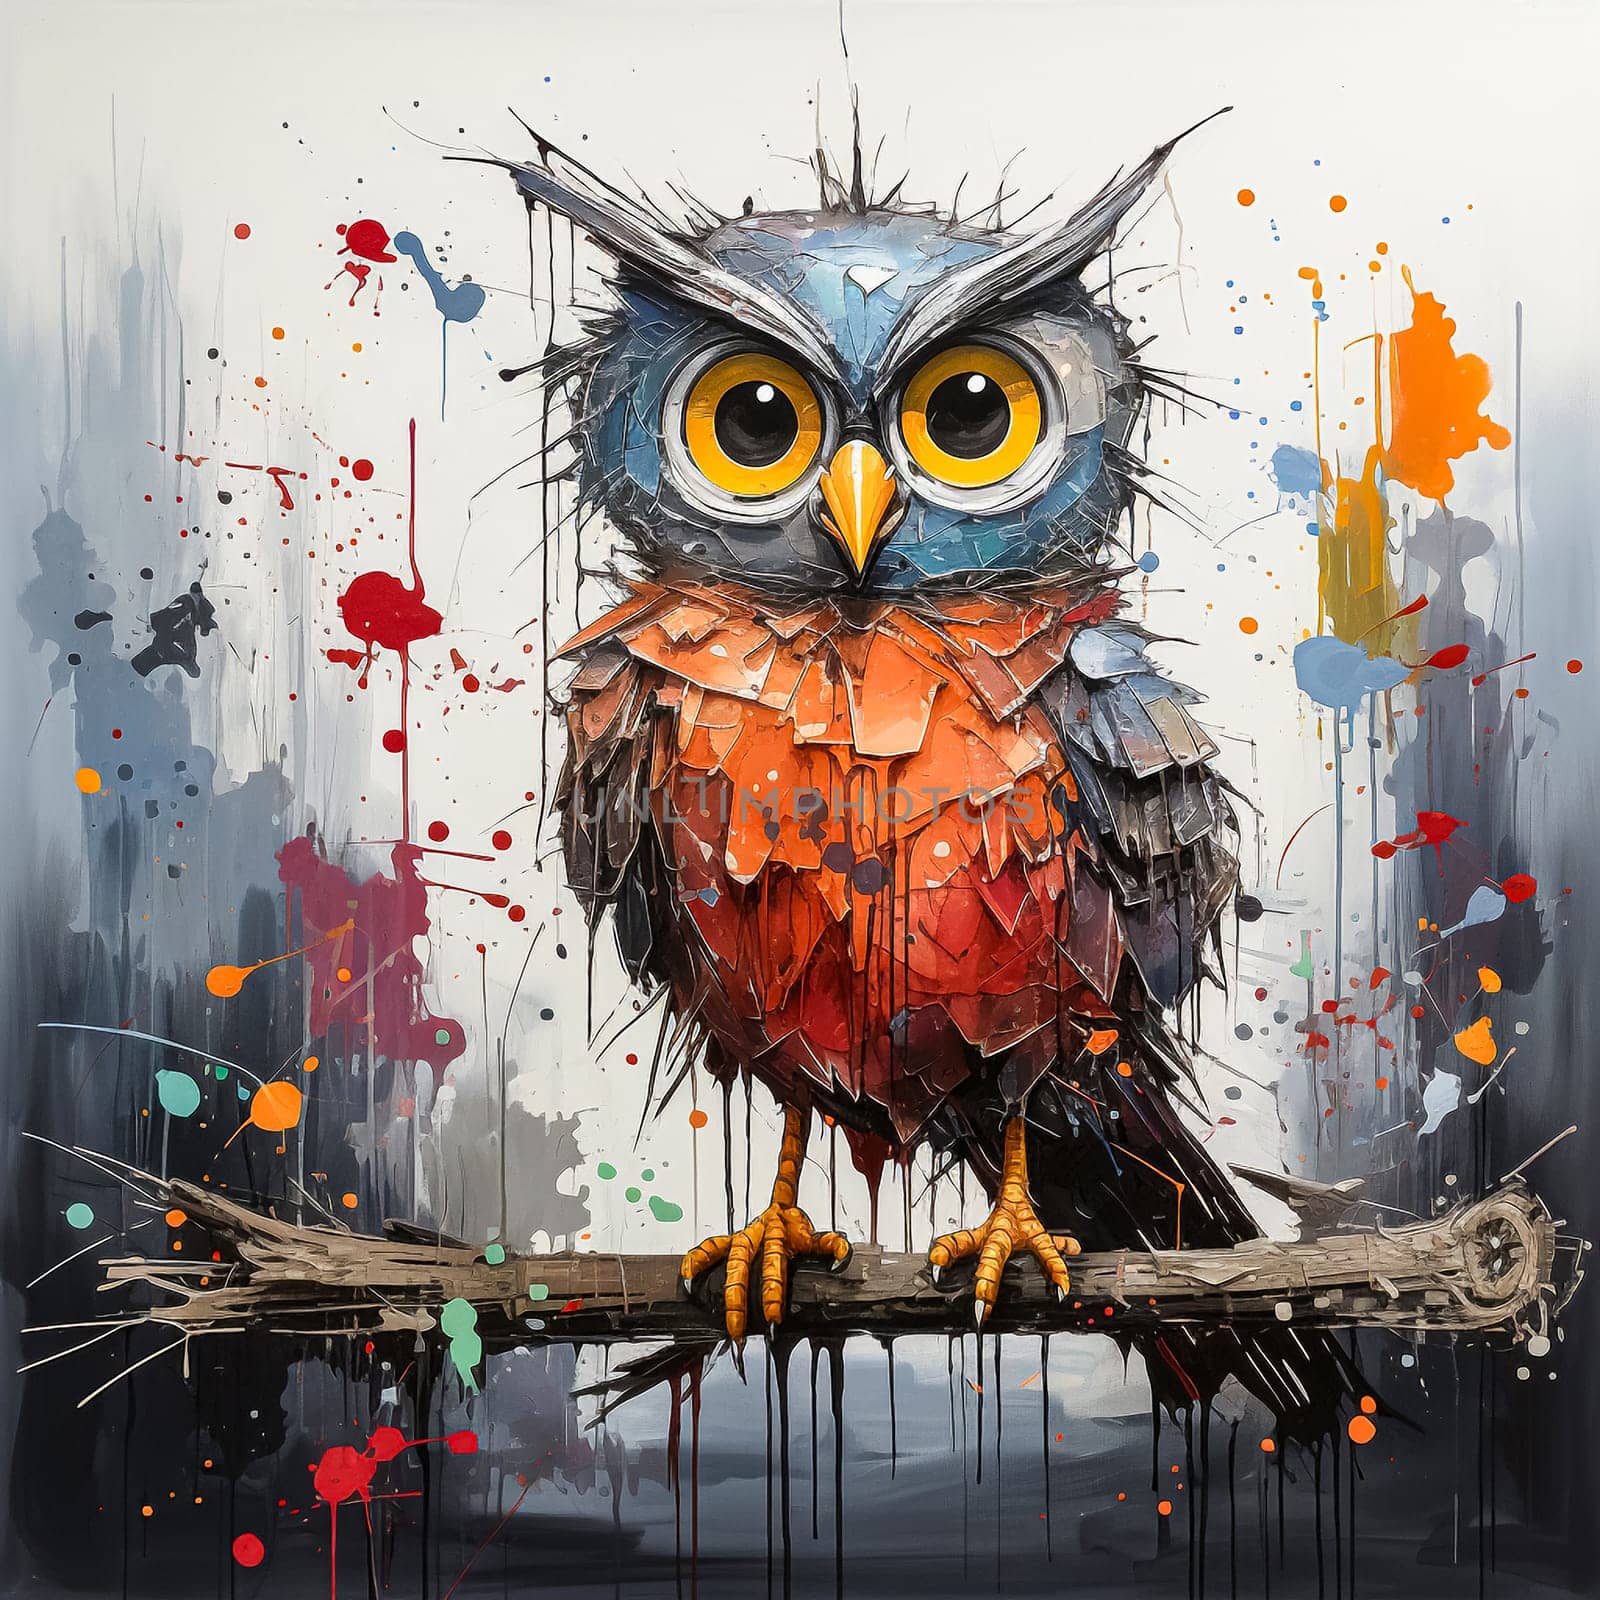 Portrait of a Majestic Owl, a charming watercolor painting of an owl, showcasing the birds grace and charming features